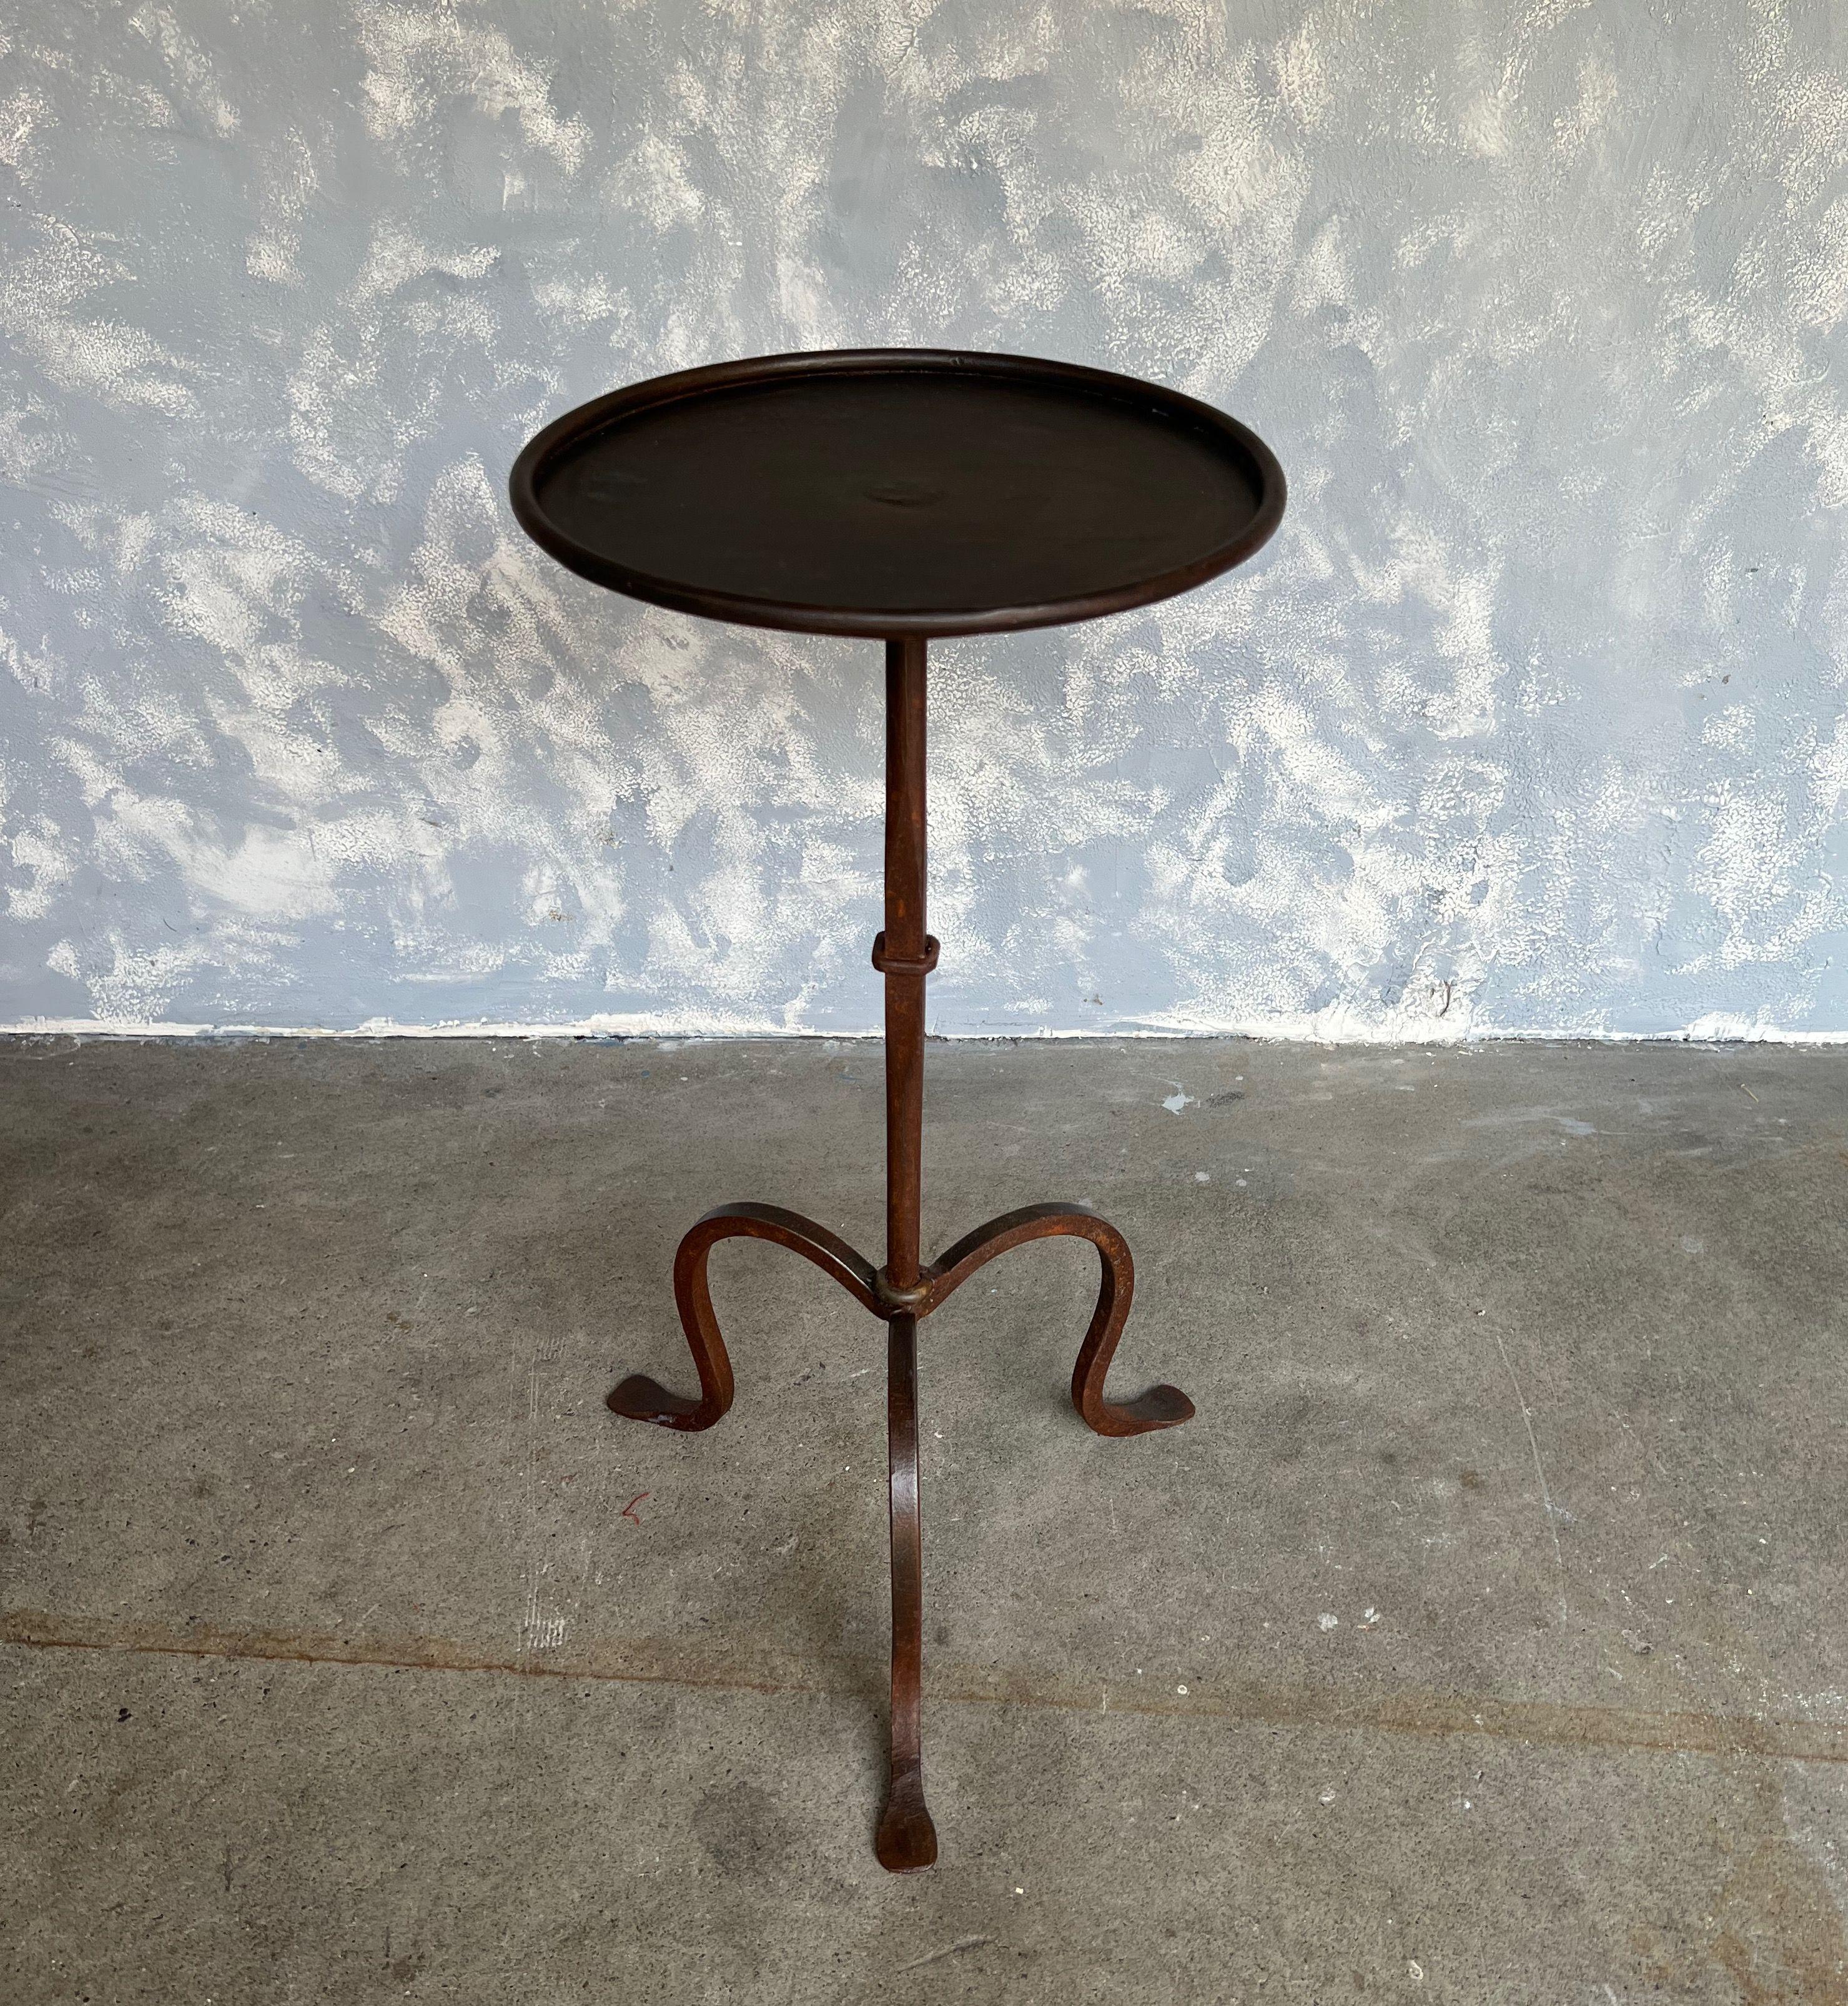 Bronzed Spanish Metal Drinks Table with a Bronze Patinated Finish